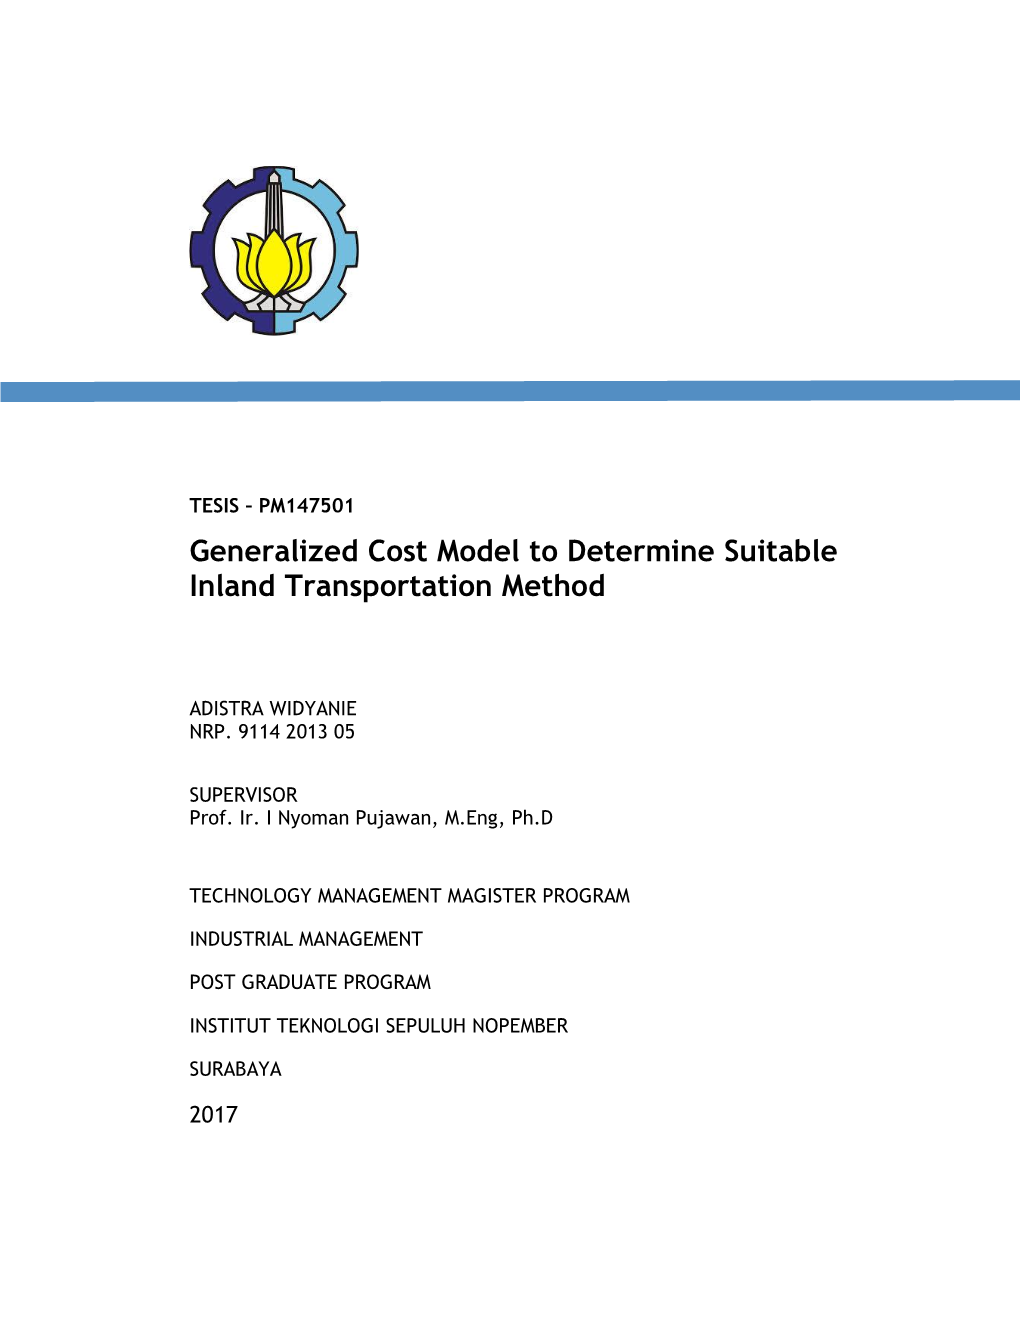 Generalized Cost Model to Determine Suitable Inland Transportation Method